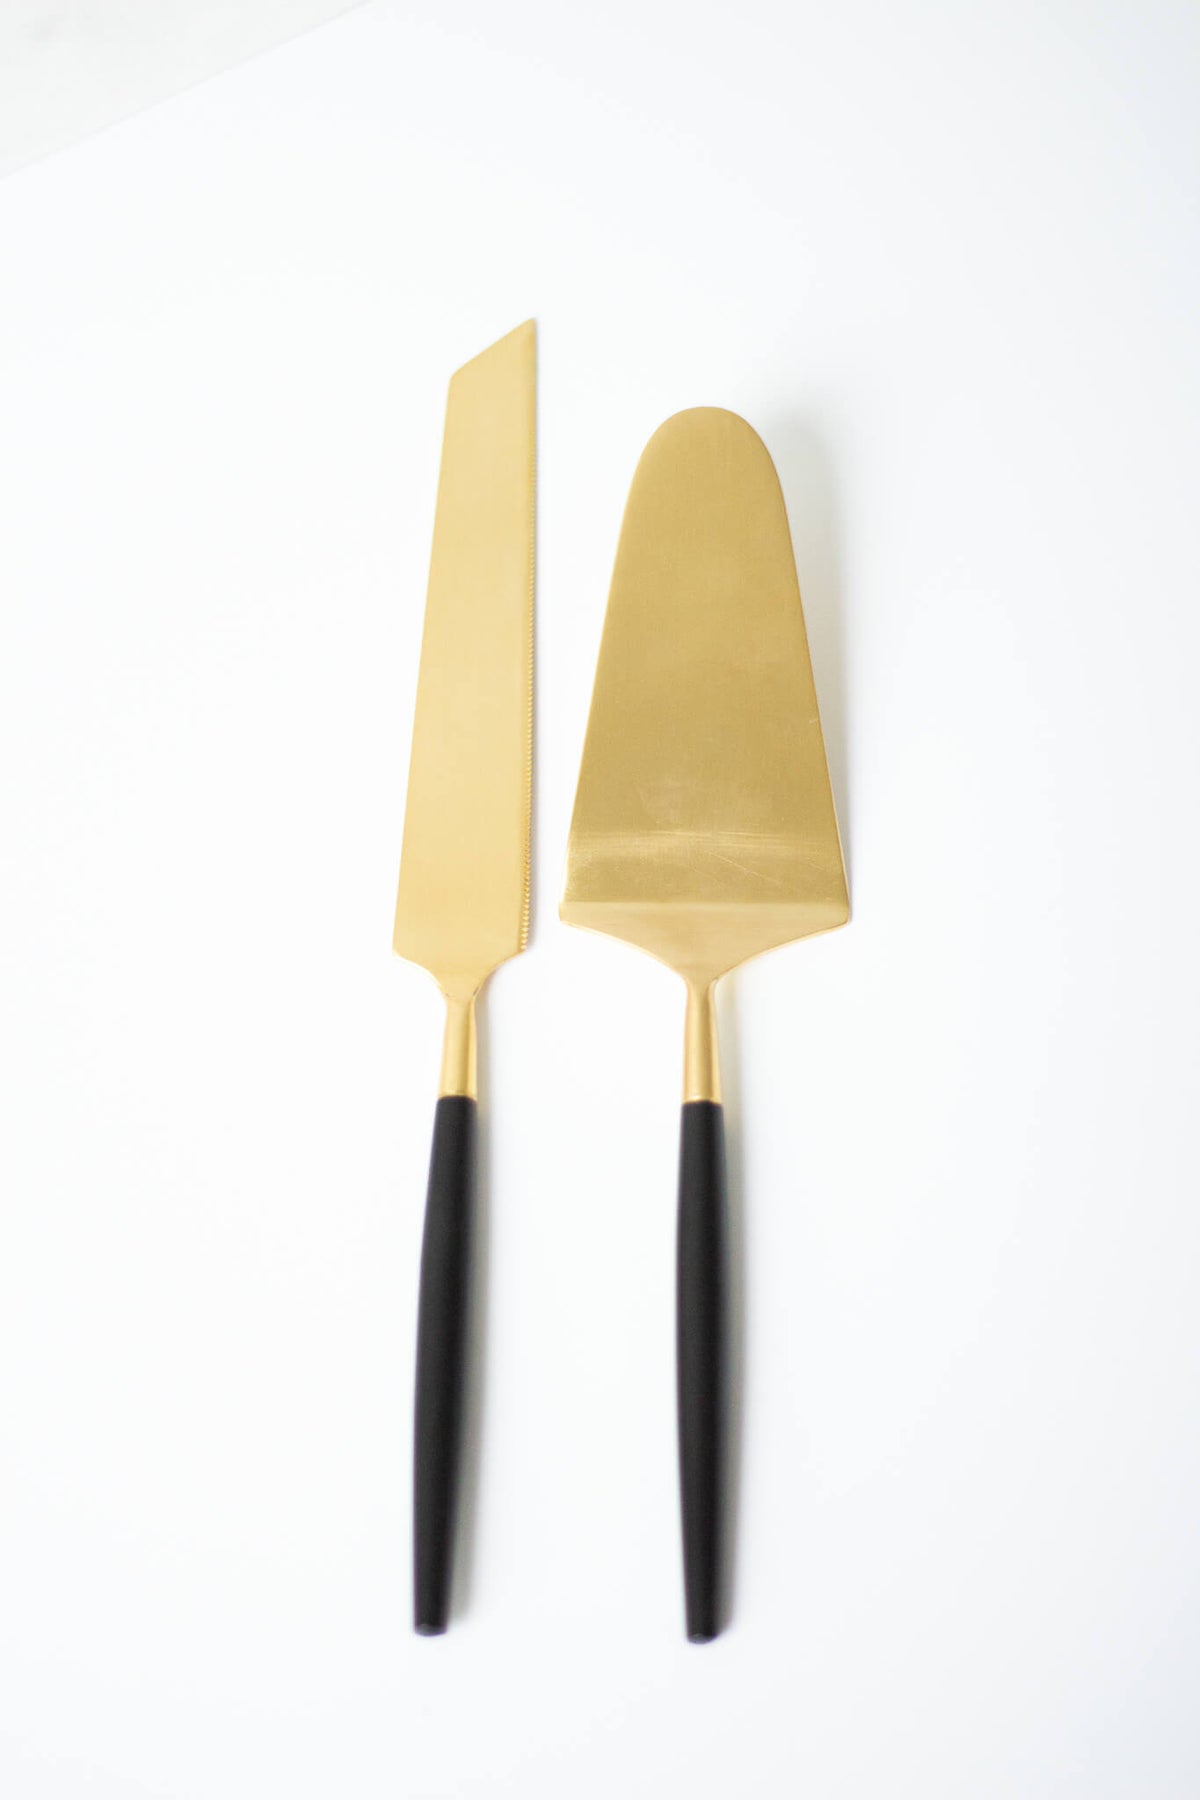 Be Home Black + Gold Cake Lift and Knife Set